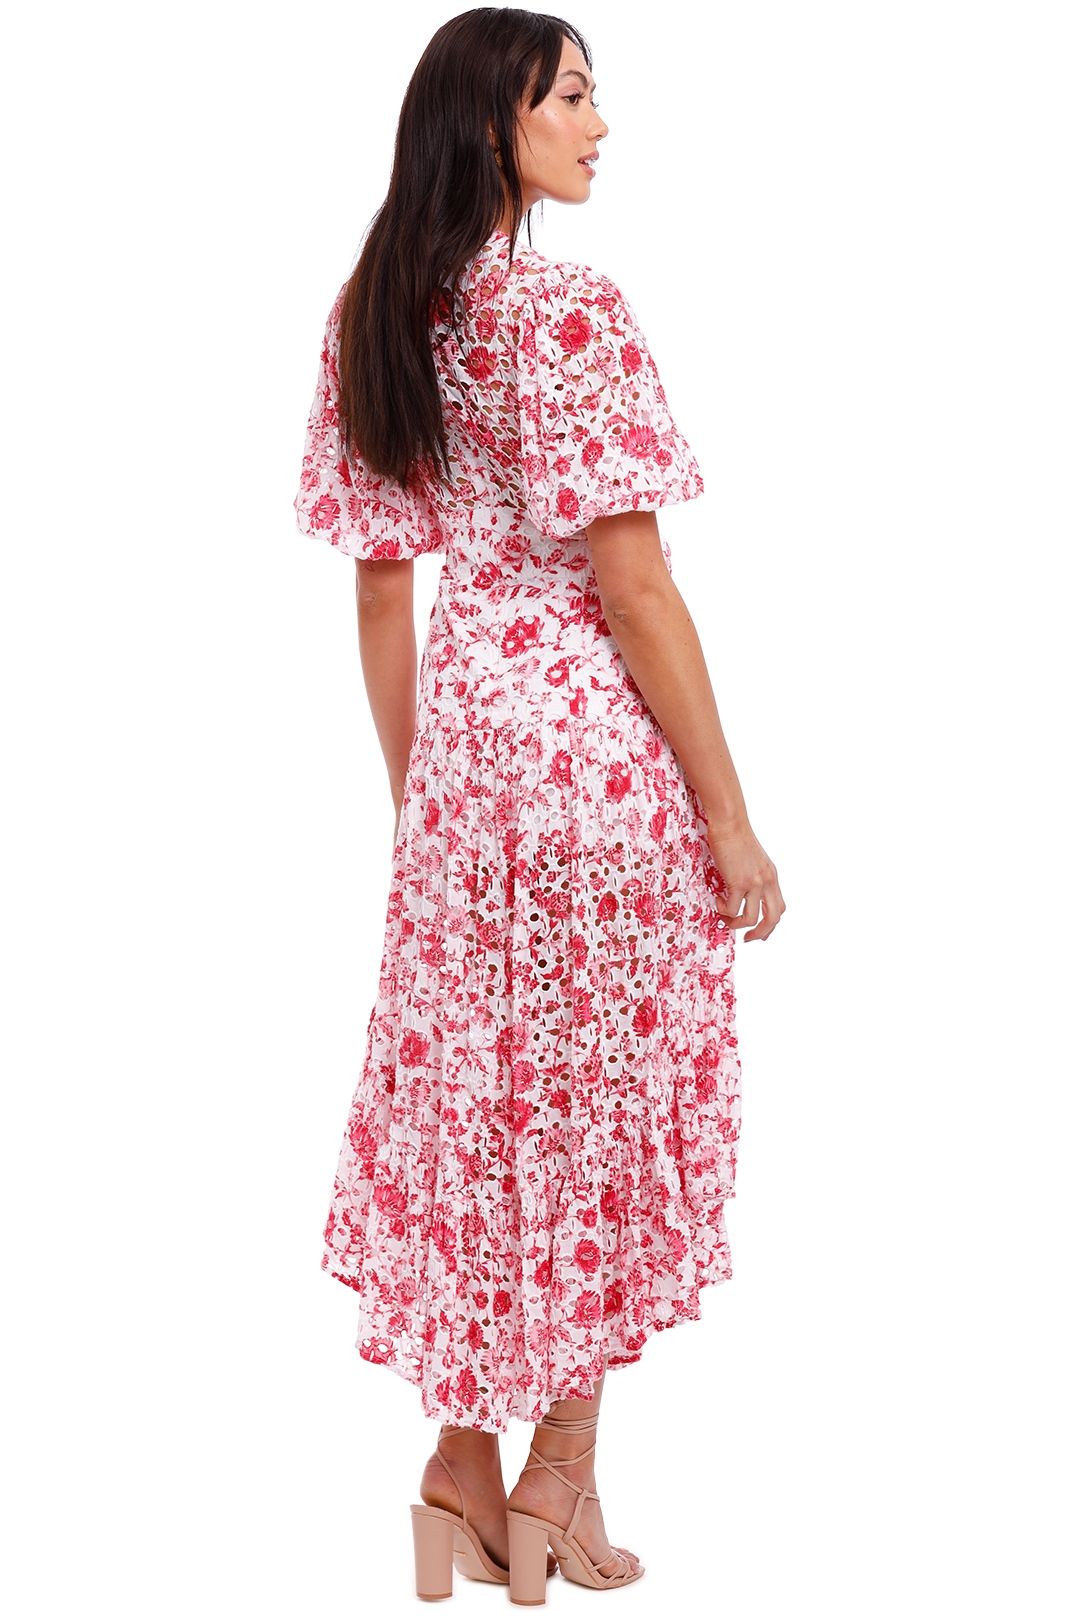 Significant Other Charlotte Dress Red Floral